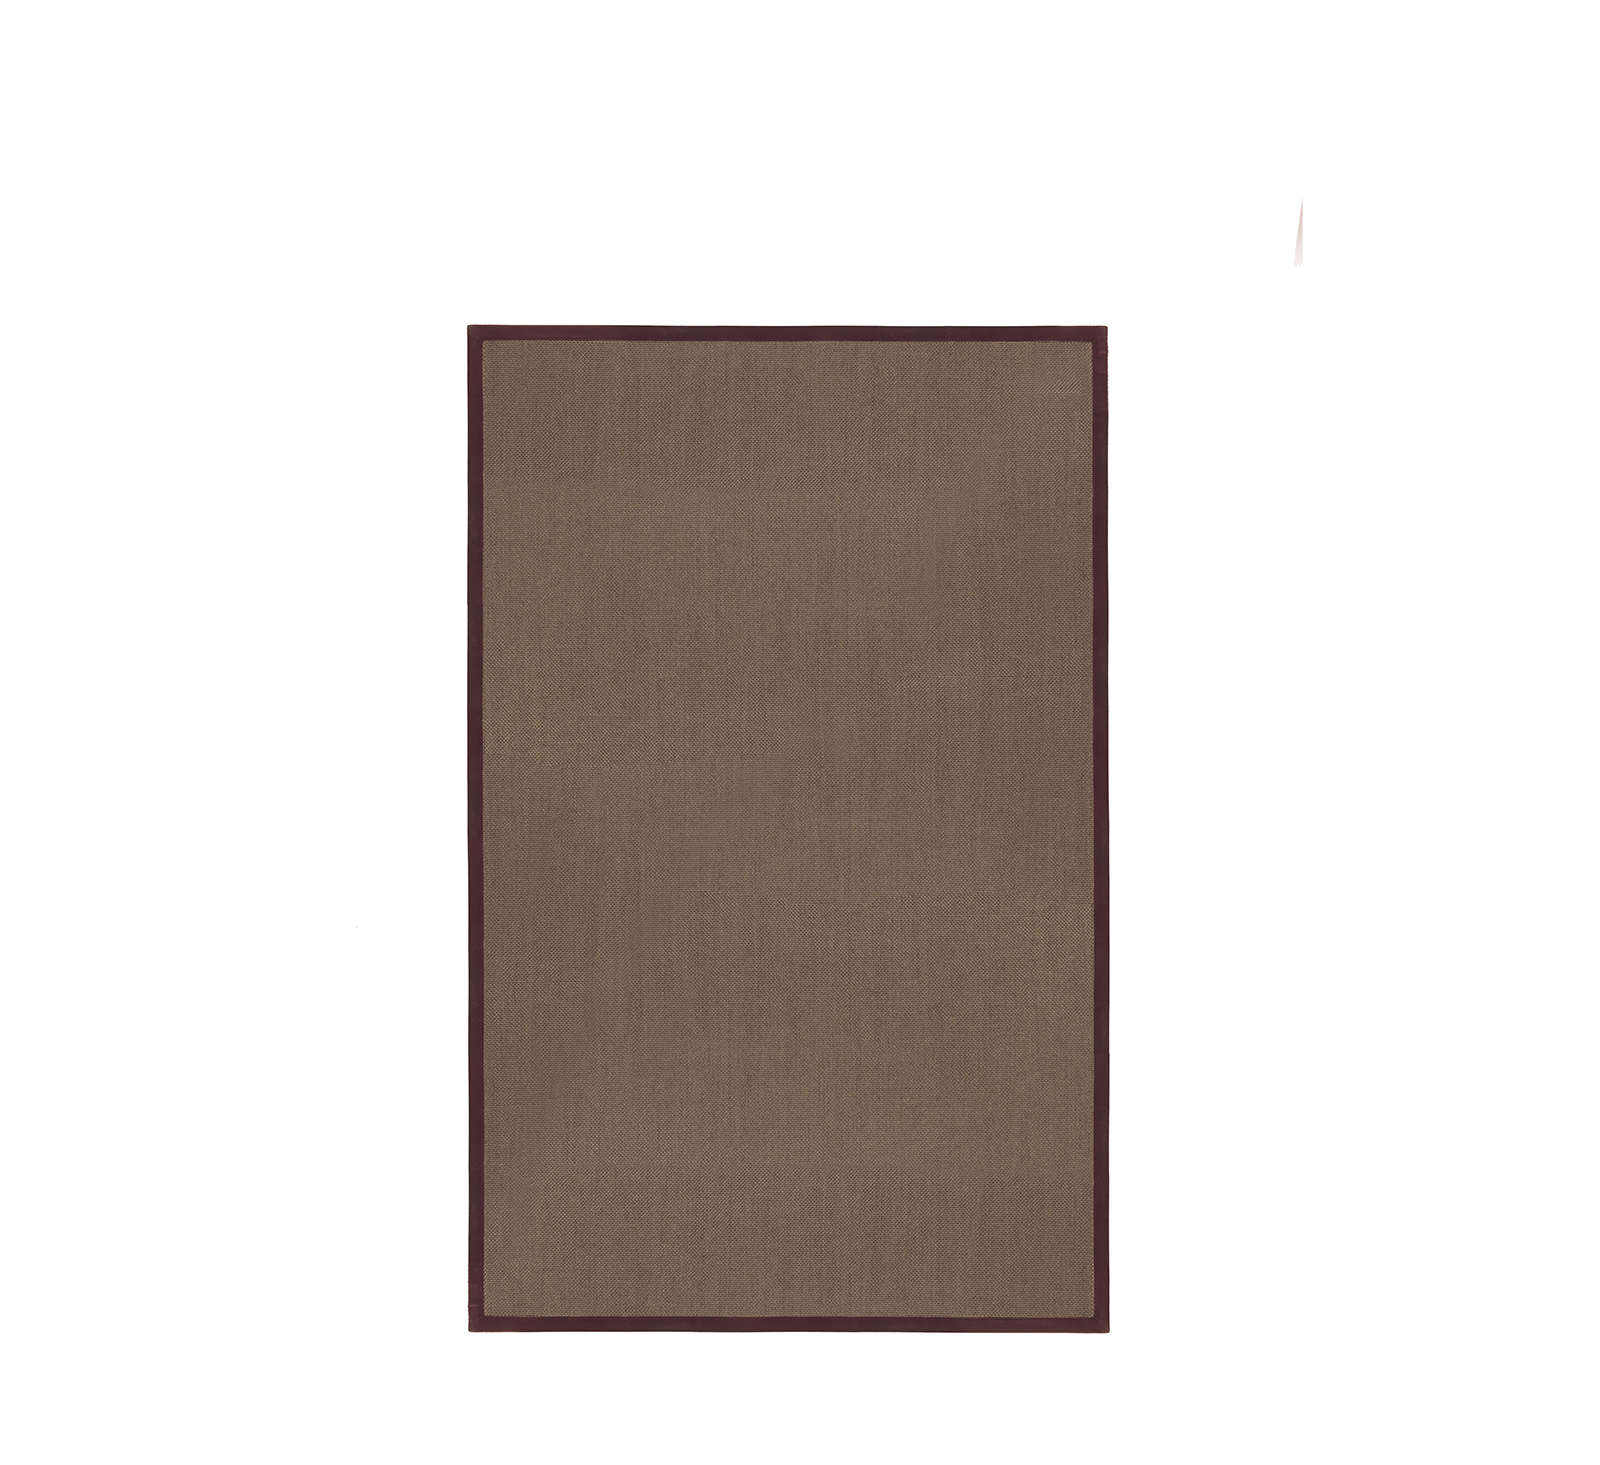 ETRO_HIMBA_rug_cover-2